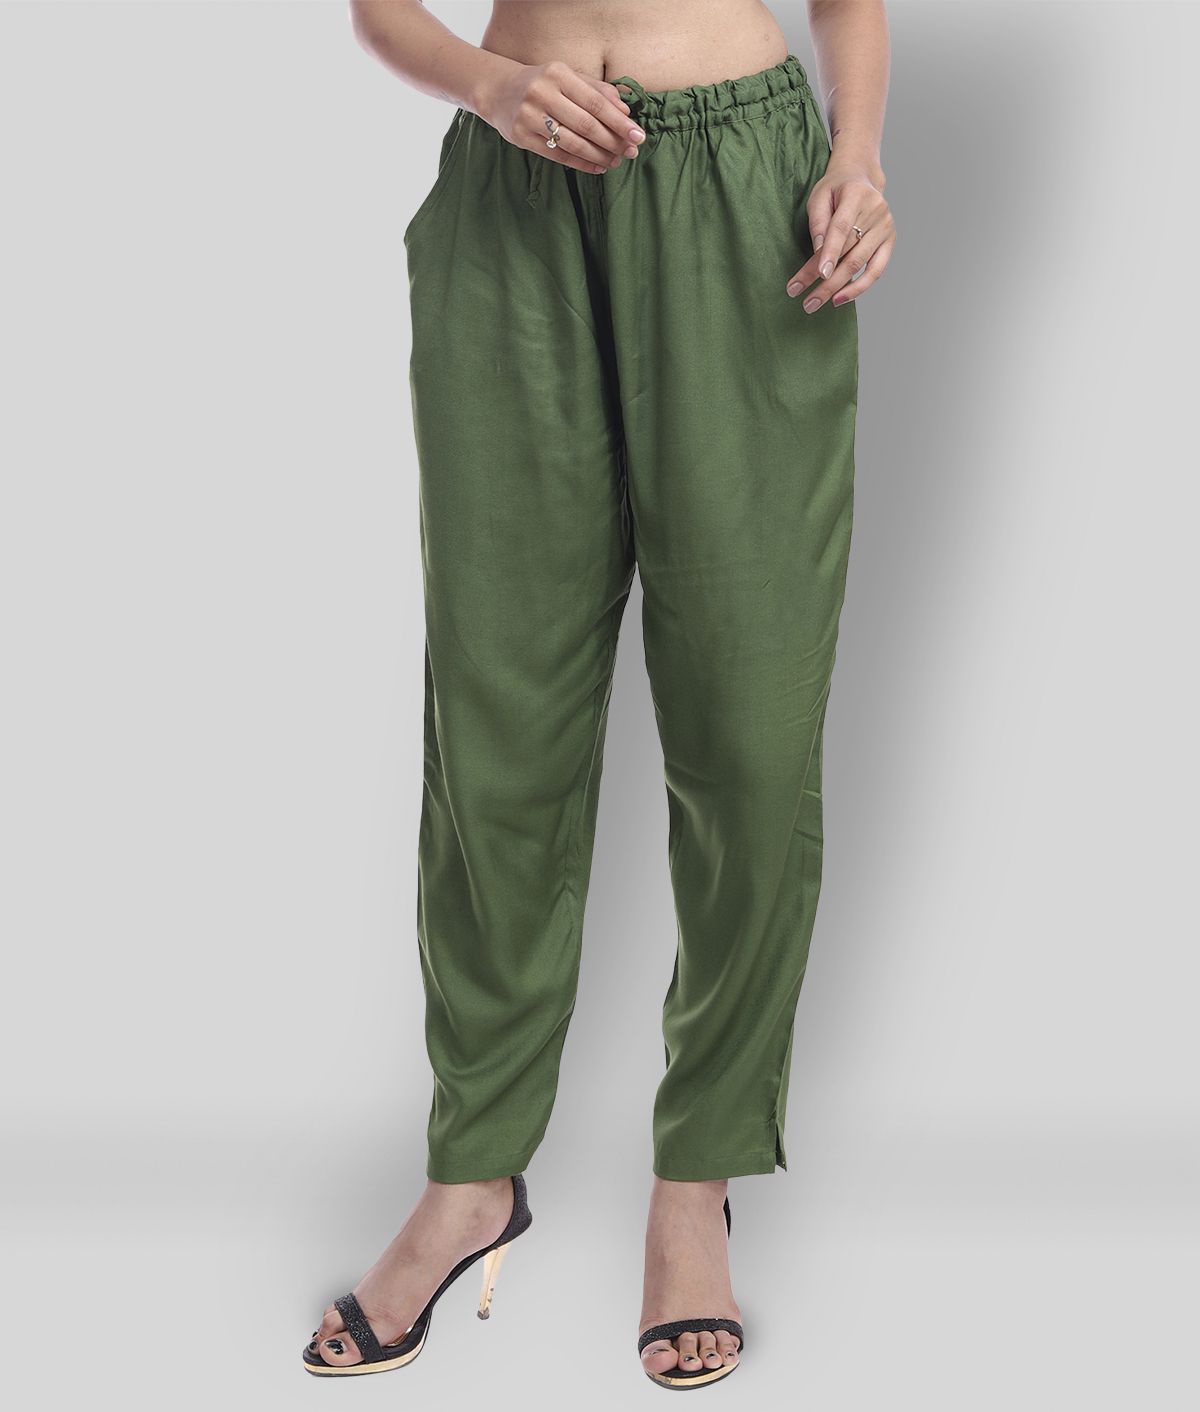     			Lee Moda - Green Rayon Flared Fit Women's Casual Pants  ( Pack of 1 )